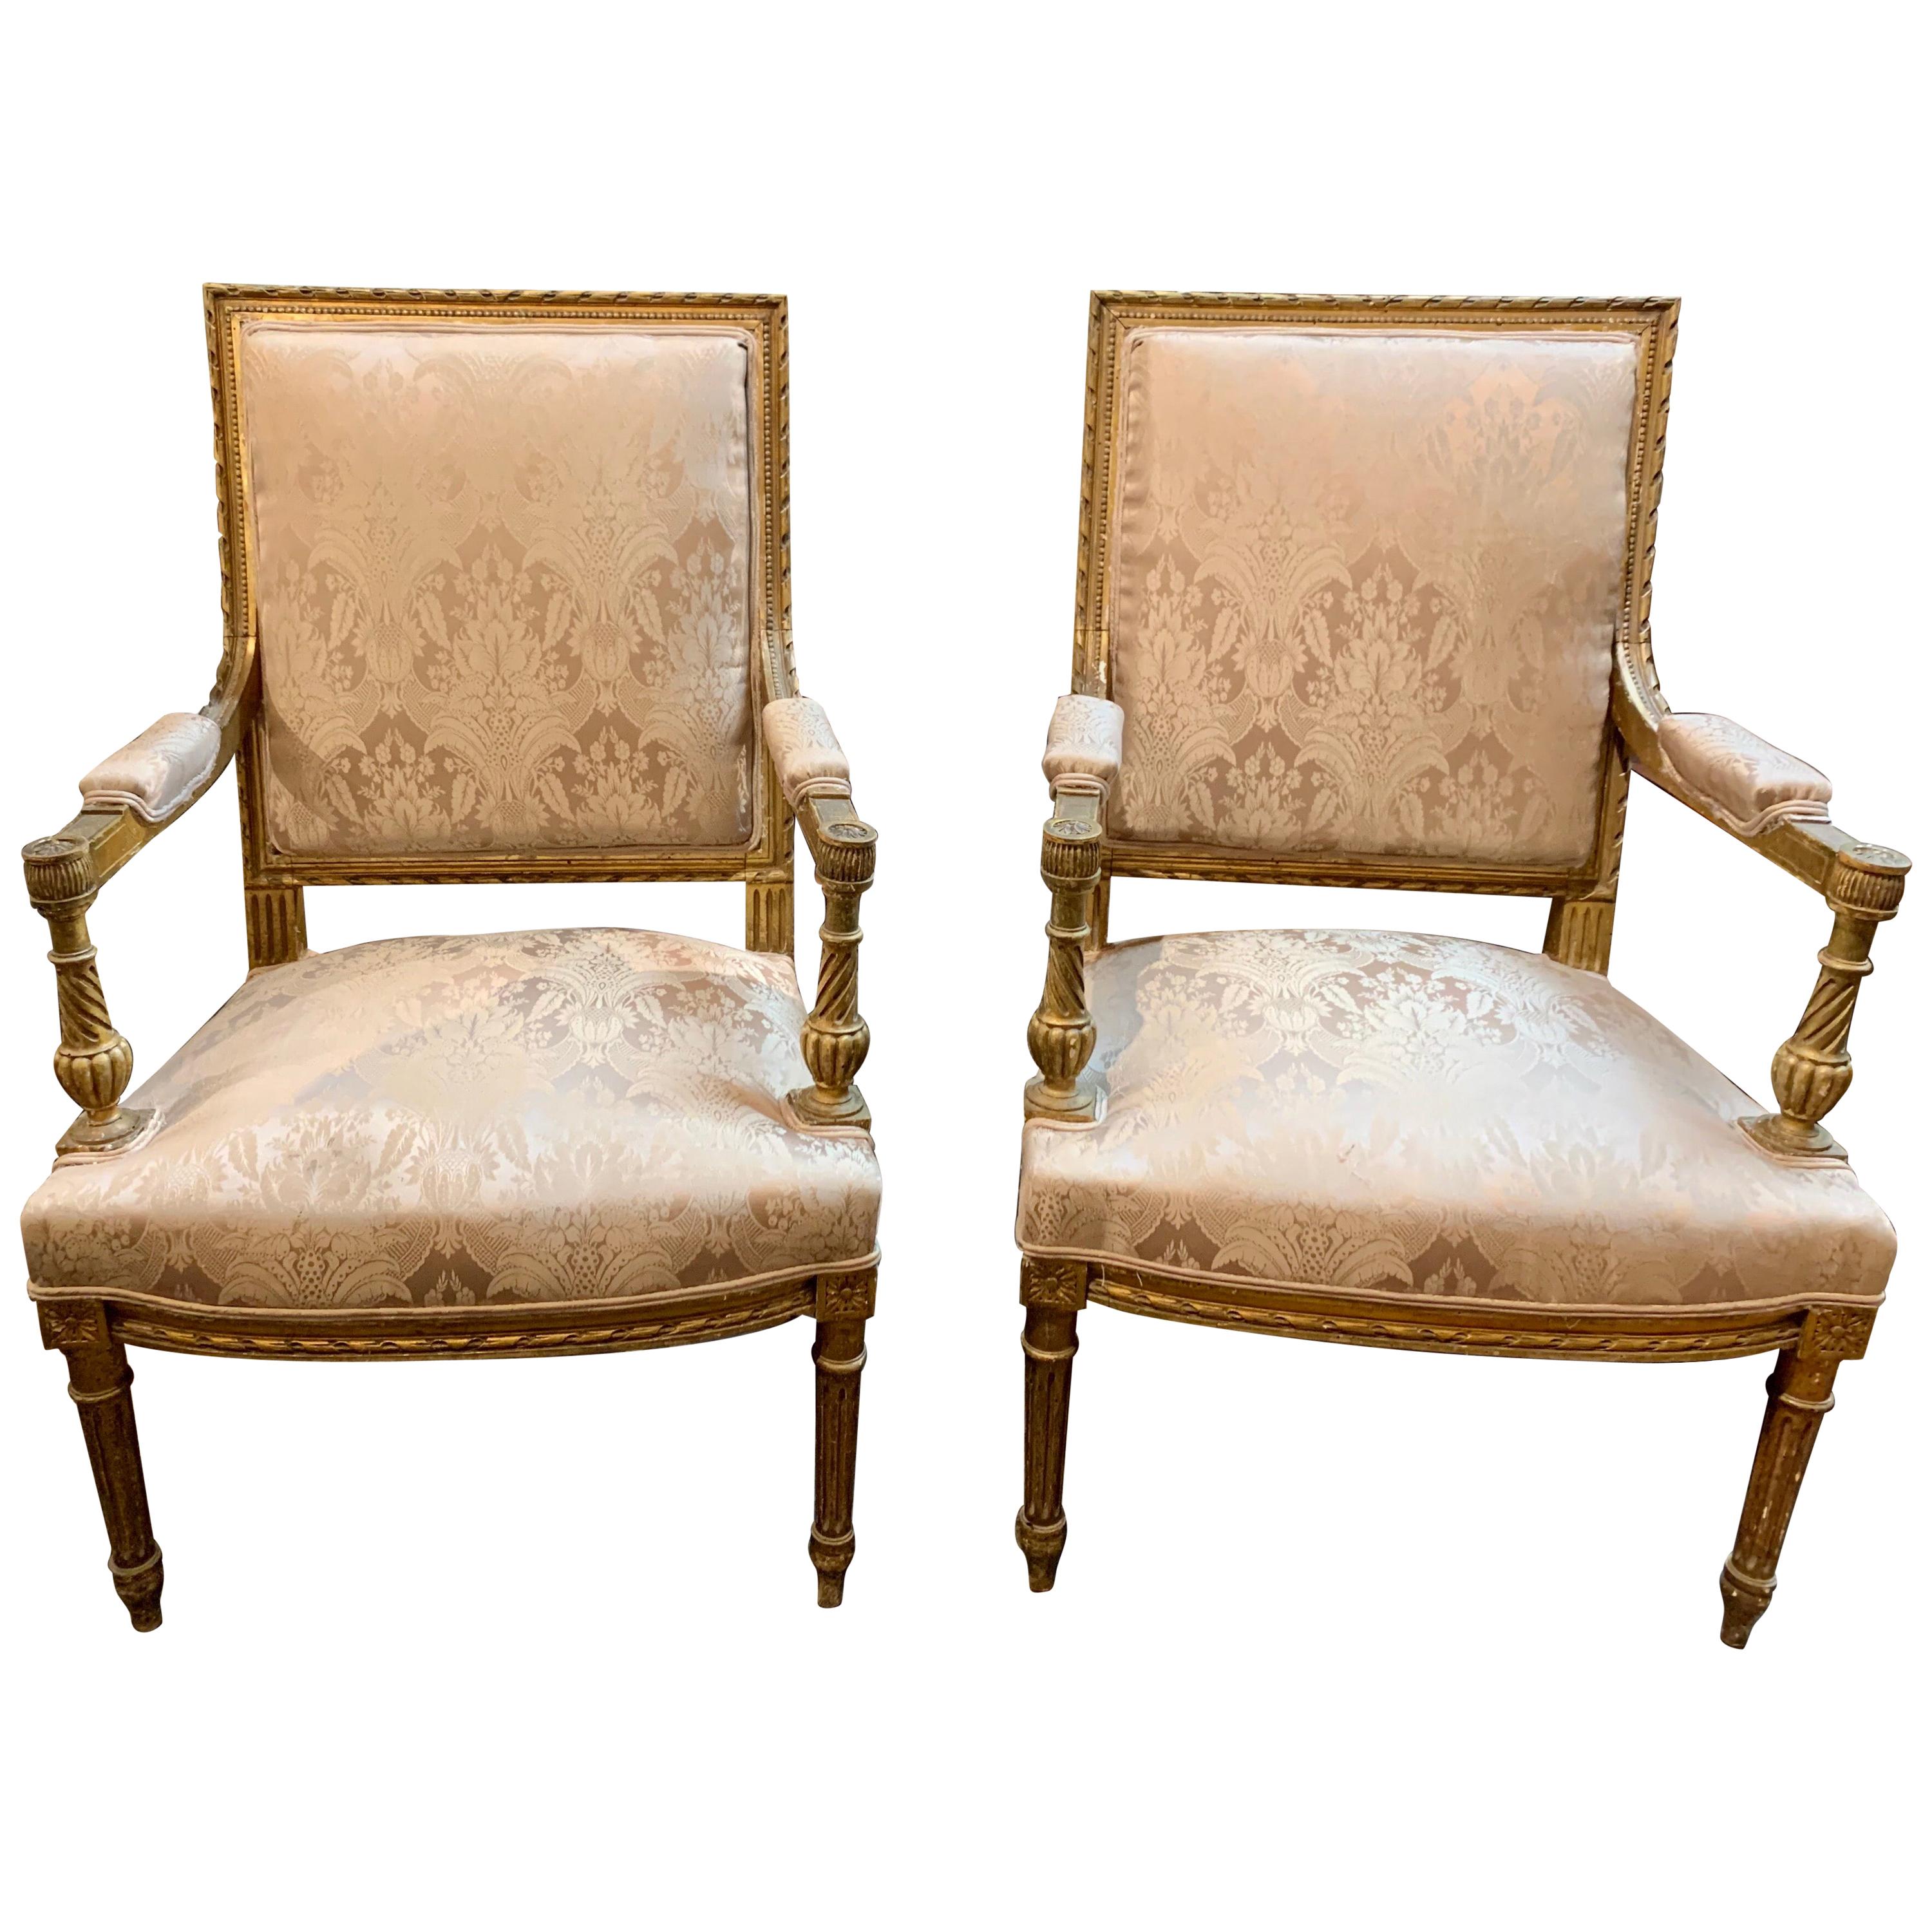 Pair of Late 19th Century French Louis XVI Style Carved Giltwood Armchairs